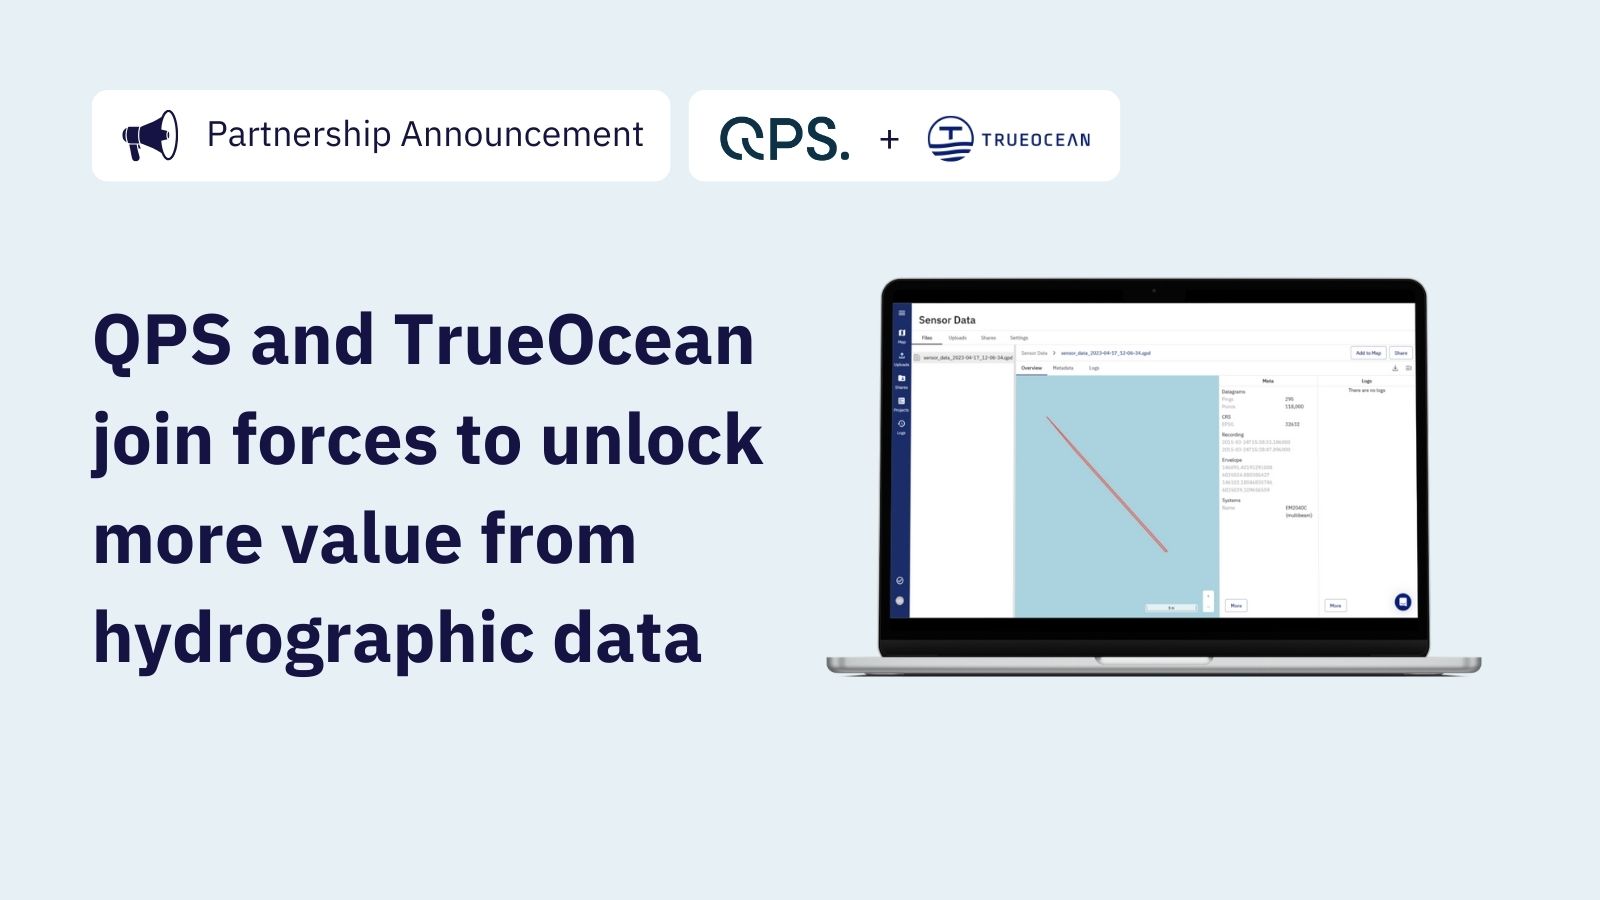 QPS and TrueOcean join forces - press release